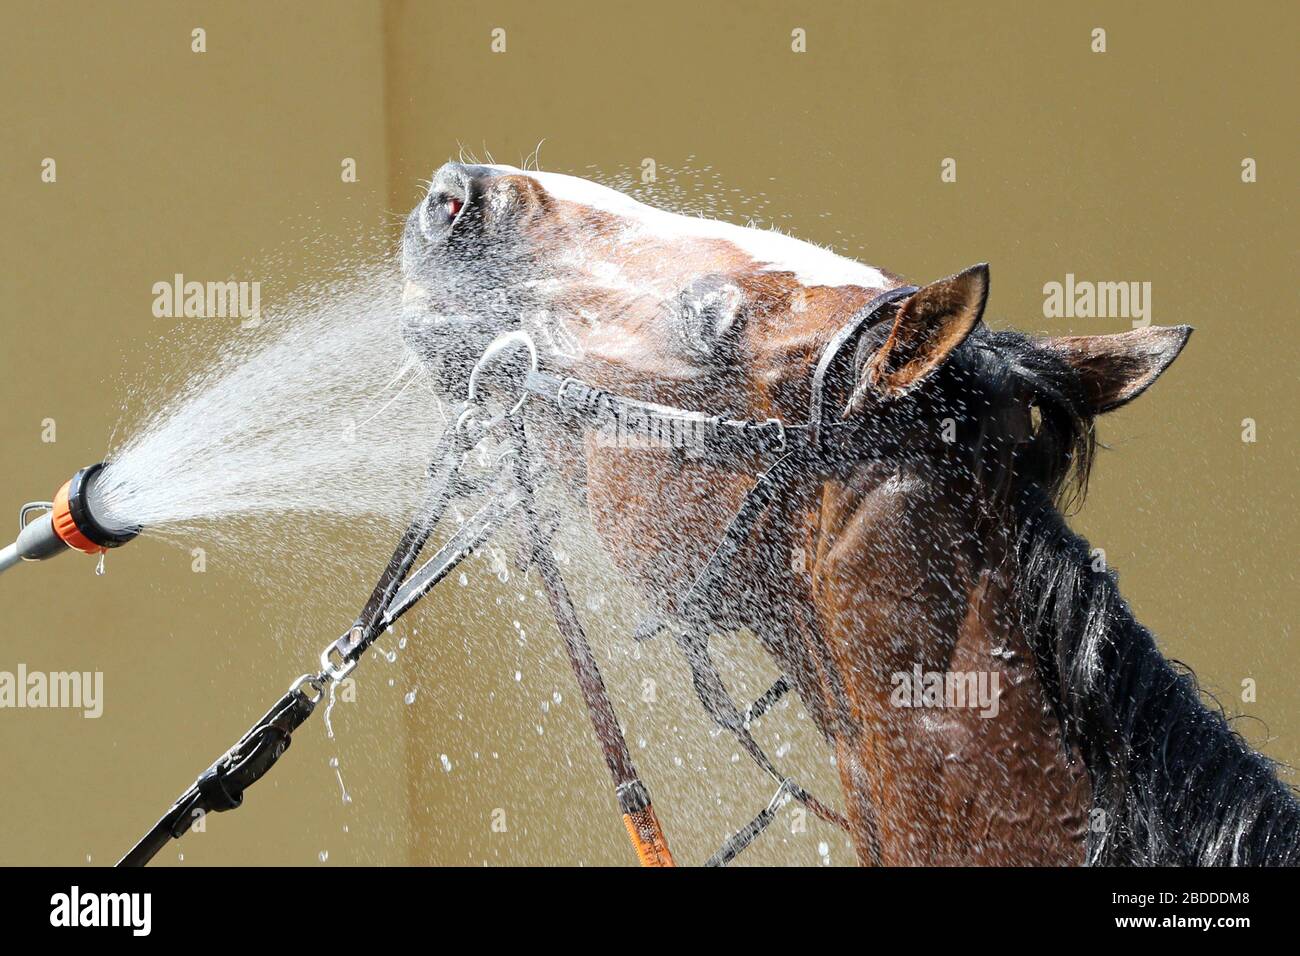 10.05.2018, Magdeburg, Saxony-Anhalt, Germany  - Horse is showered after the race. 00S180510D635CAROEX.JPG [MODEL RELEASE: NOT APPLICABLE, PROPERTY RE Stock Photo